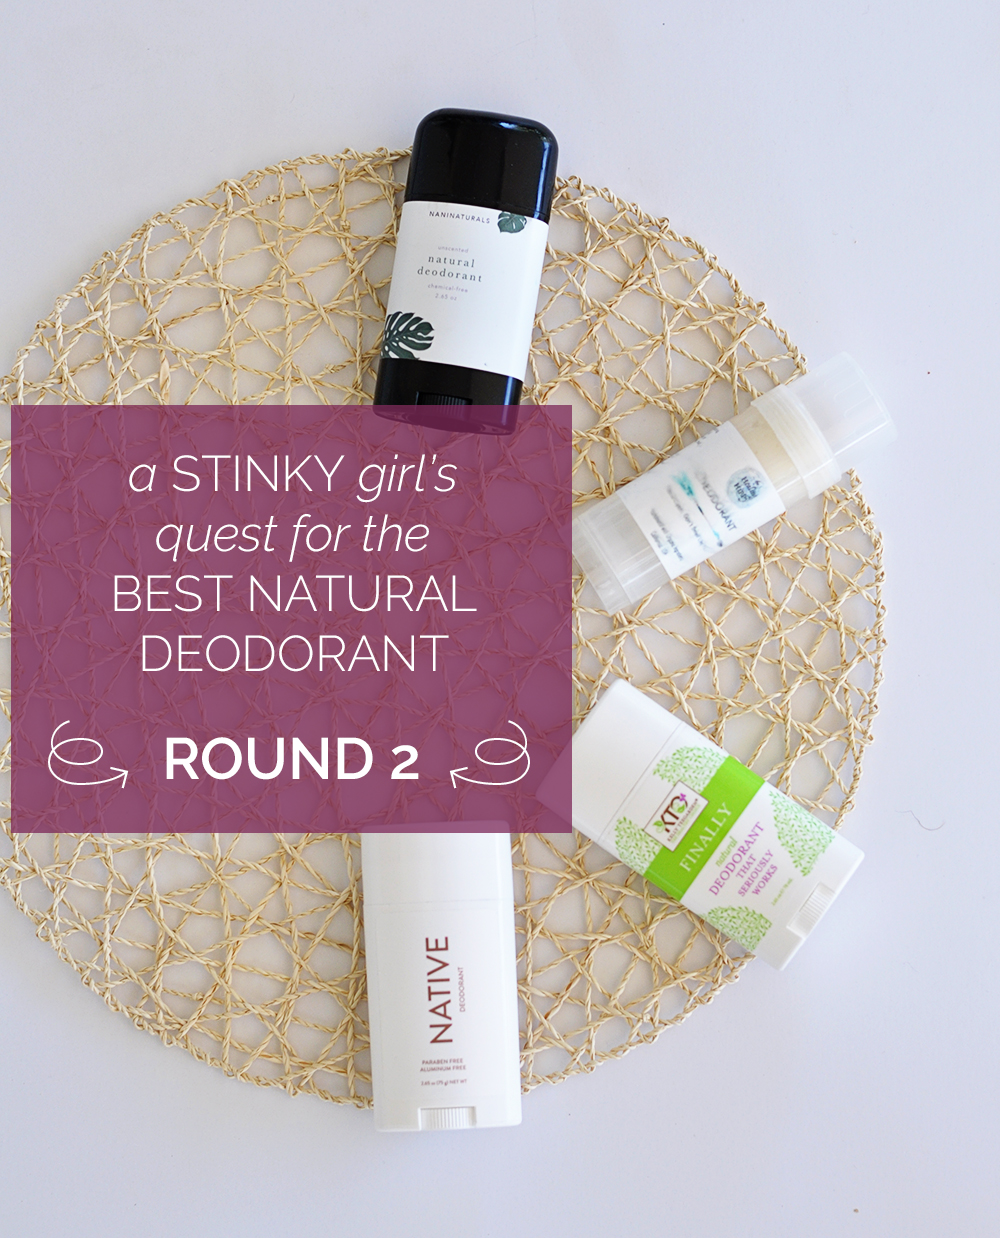 A Stinky Girl’s Quest For the Best Natural Deodorant–Round 2